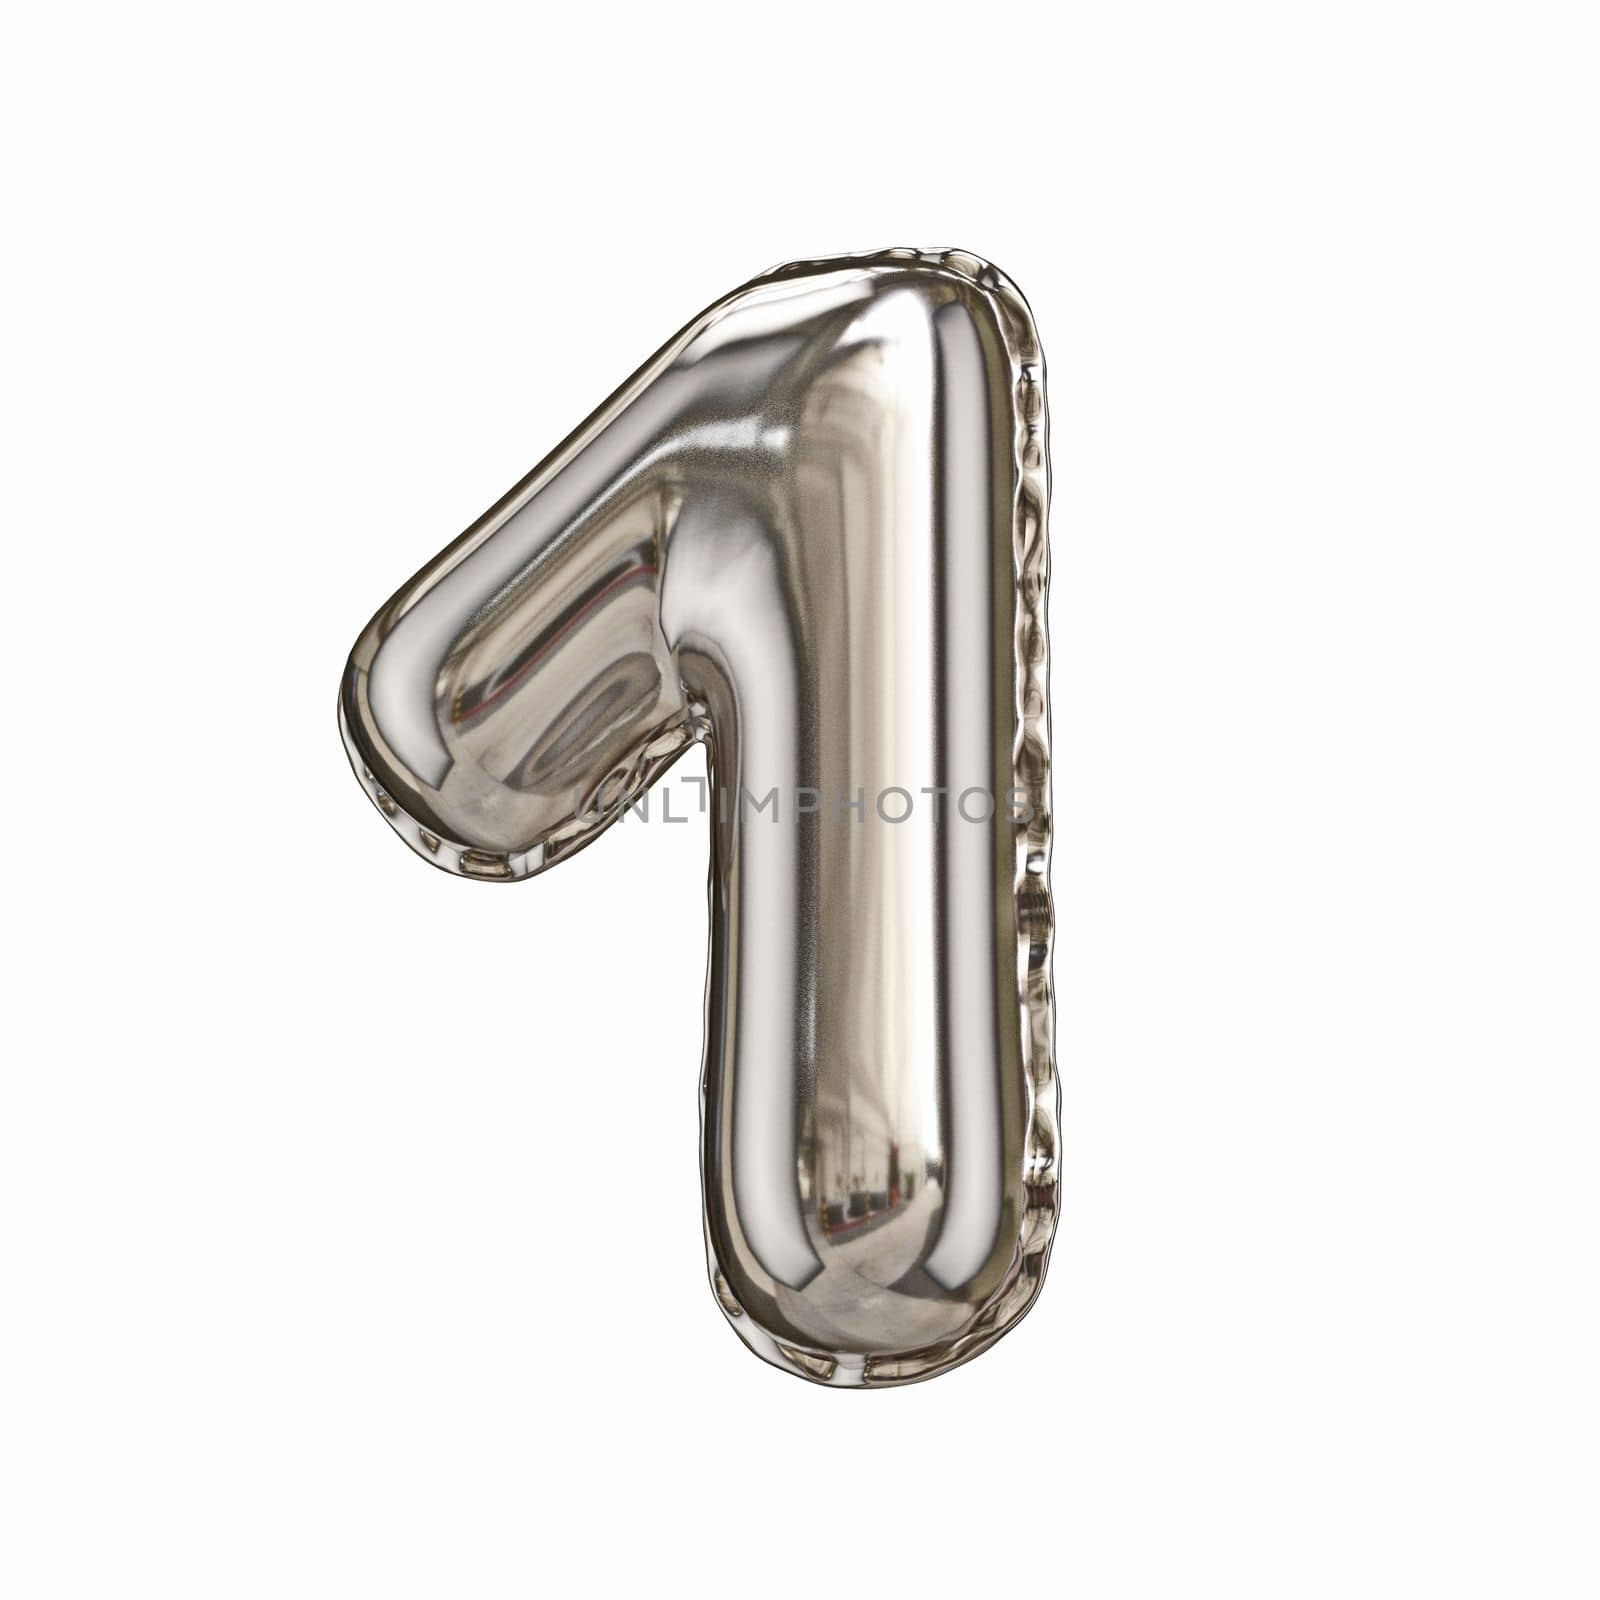 Silver foil balloon font number 1 ONE 3D rendering illustration isolated on white background